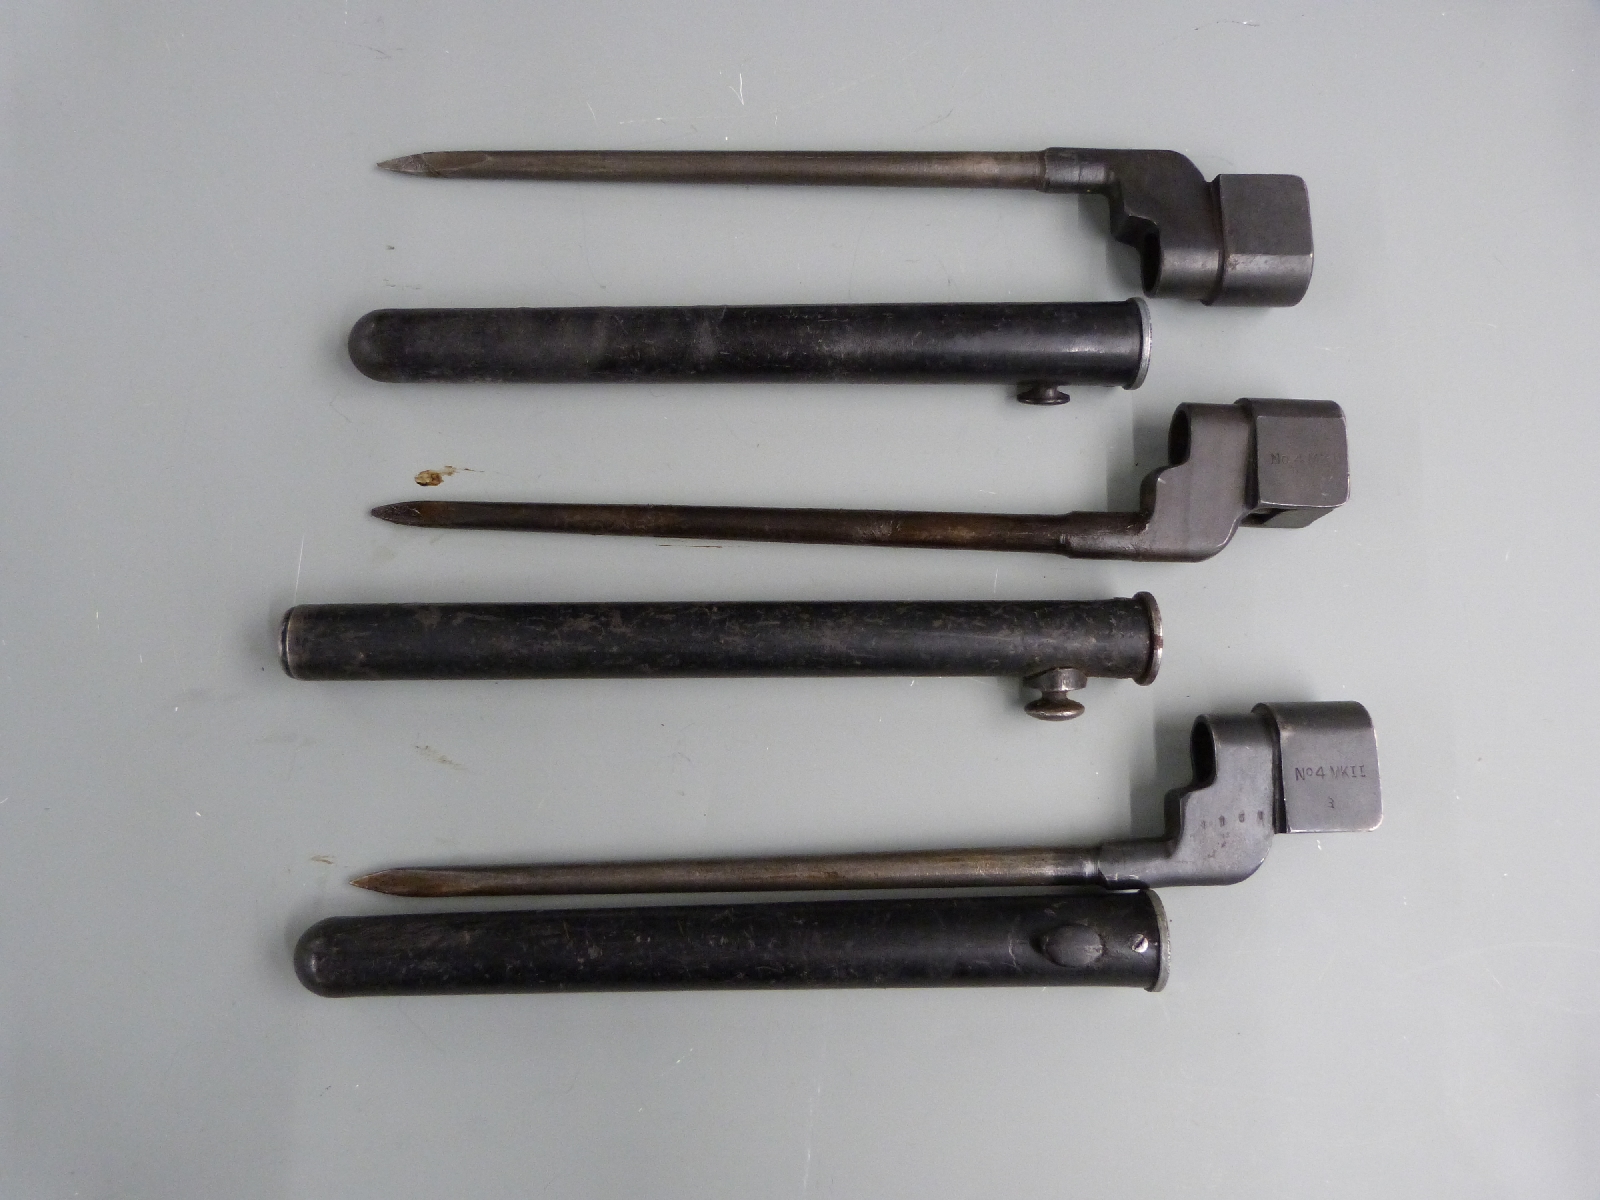 Three British No4 Mk2 spike bayonets with 20cm blades with scabbards - Image 2 of 5